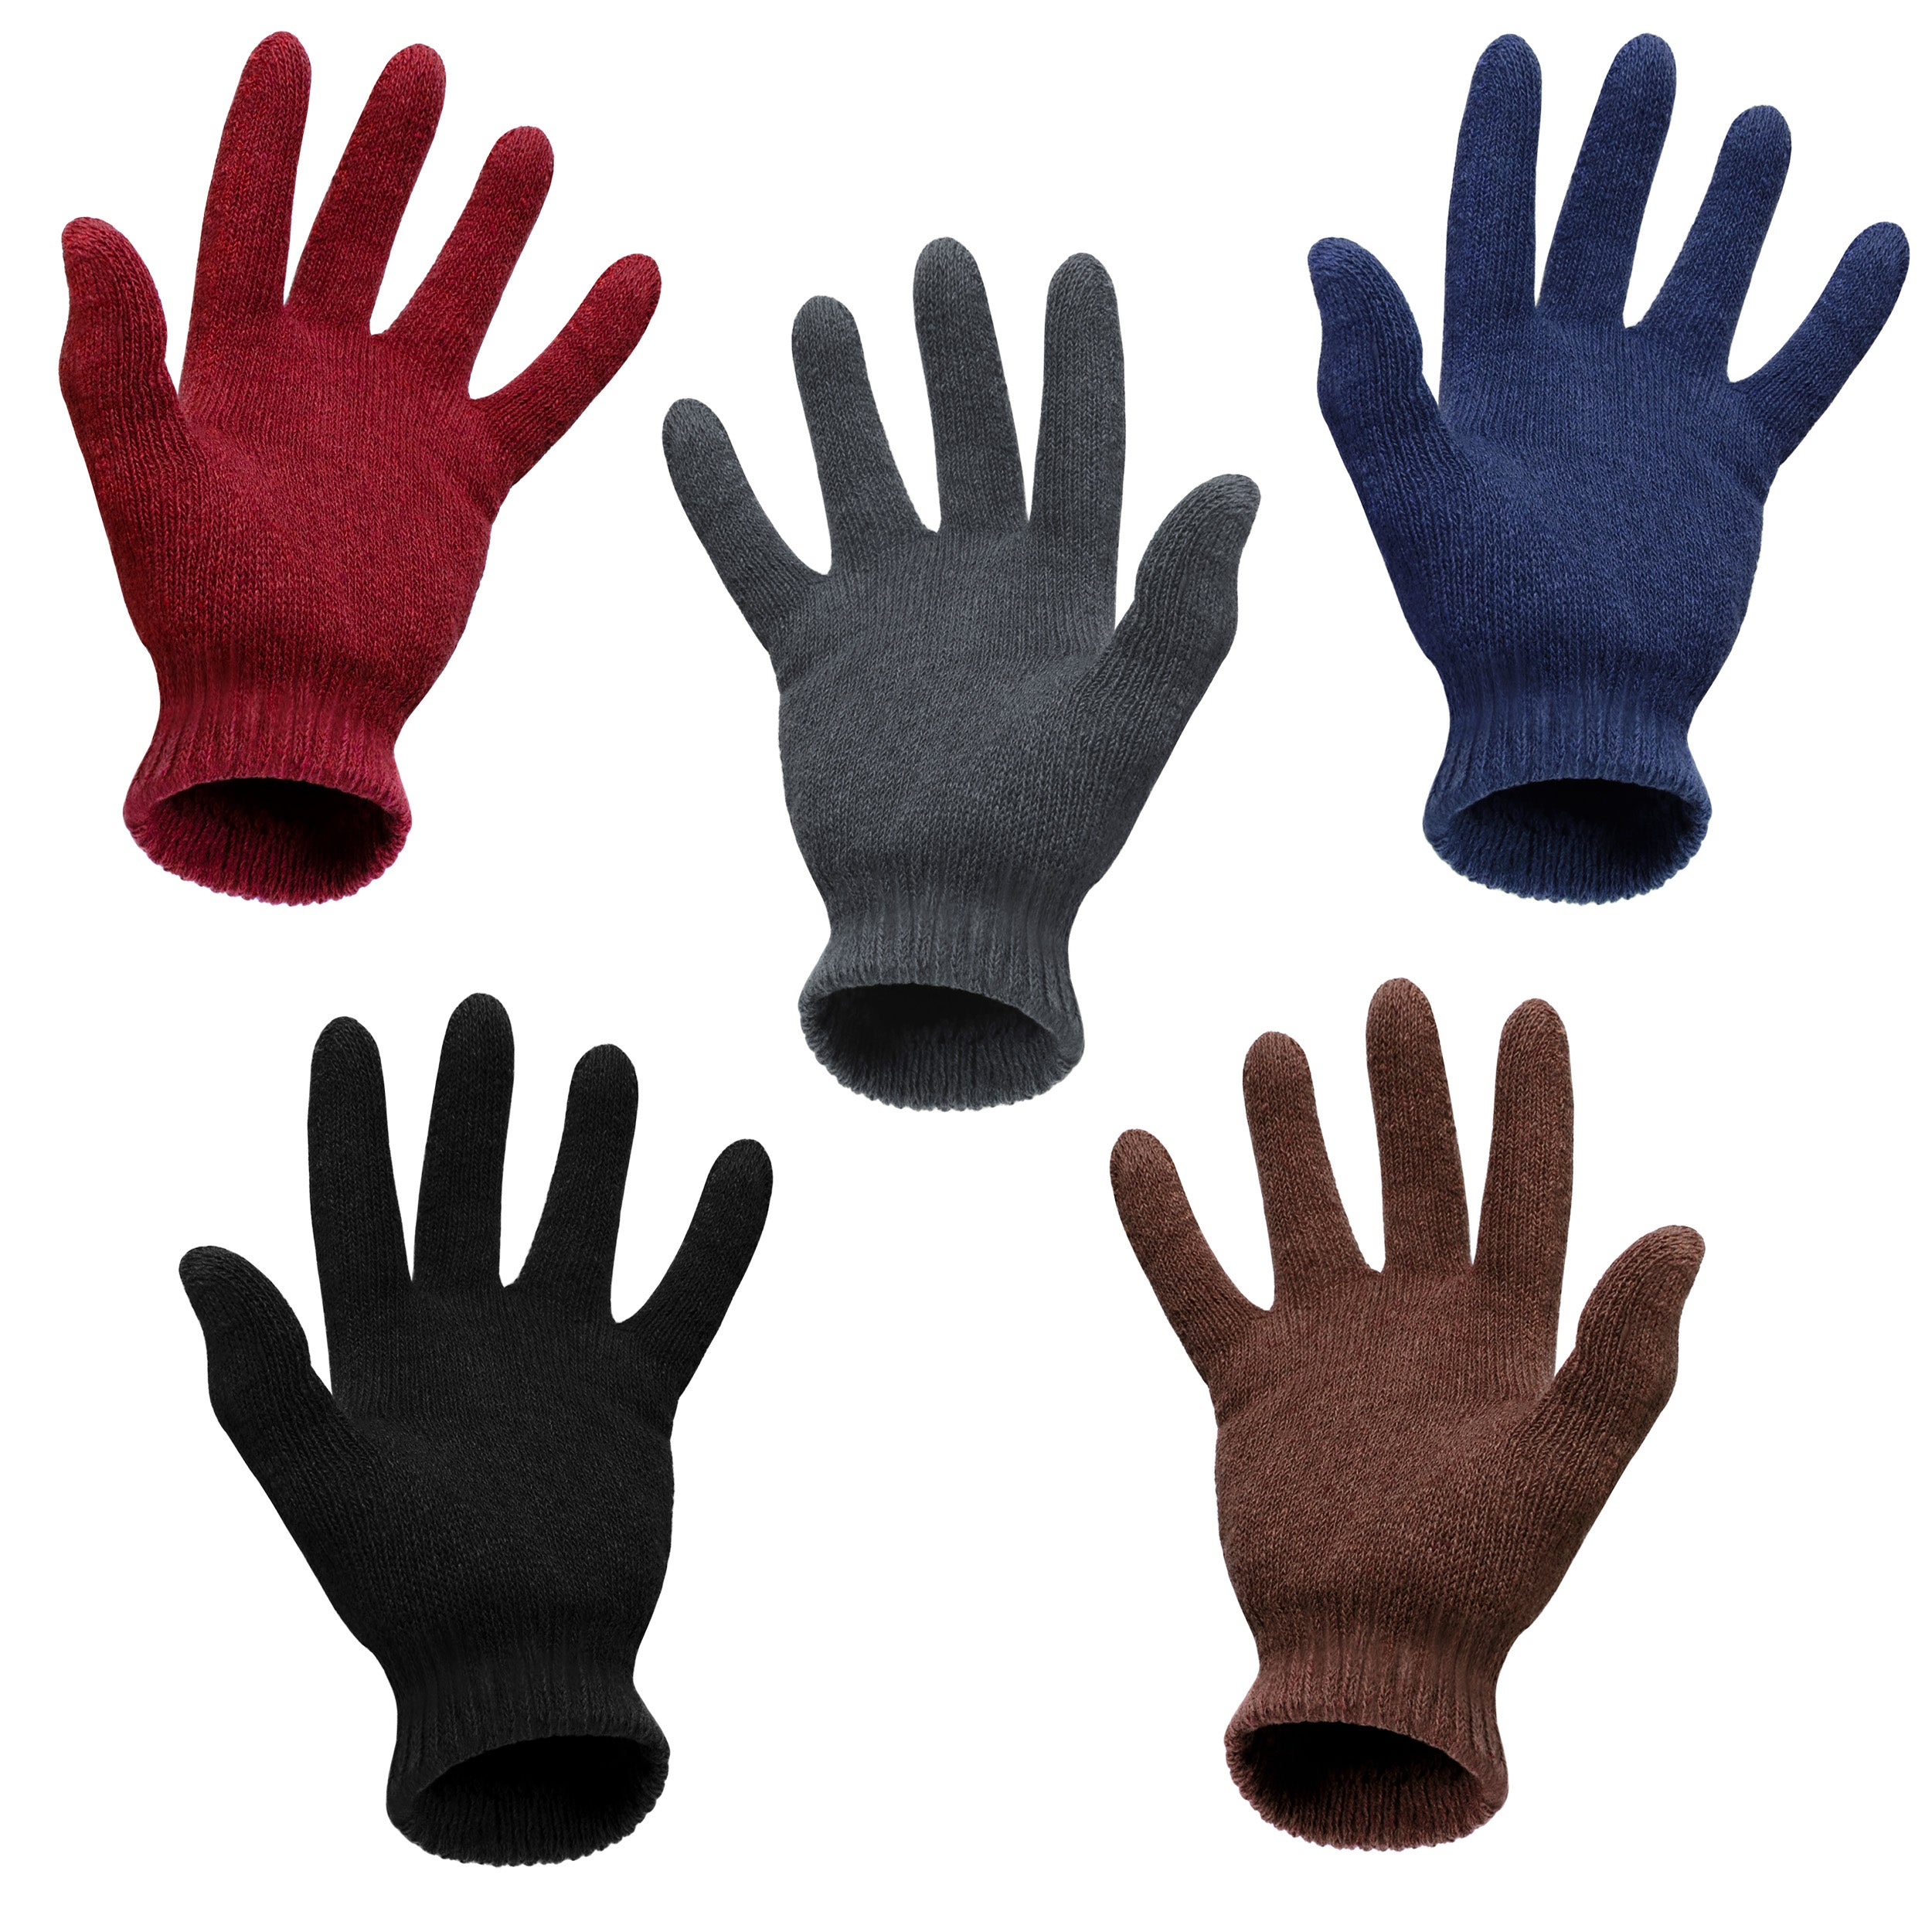 Unisex Winter Wholesale Gloves in 5 Assorted Colors - Bulk Case of 96 Pairs